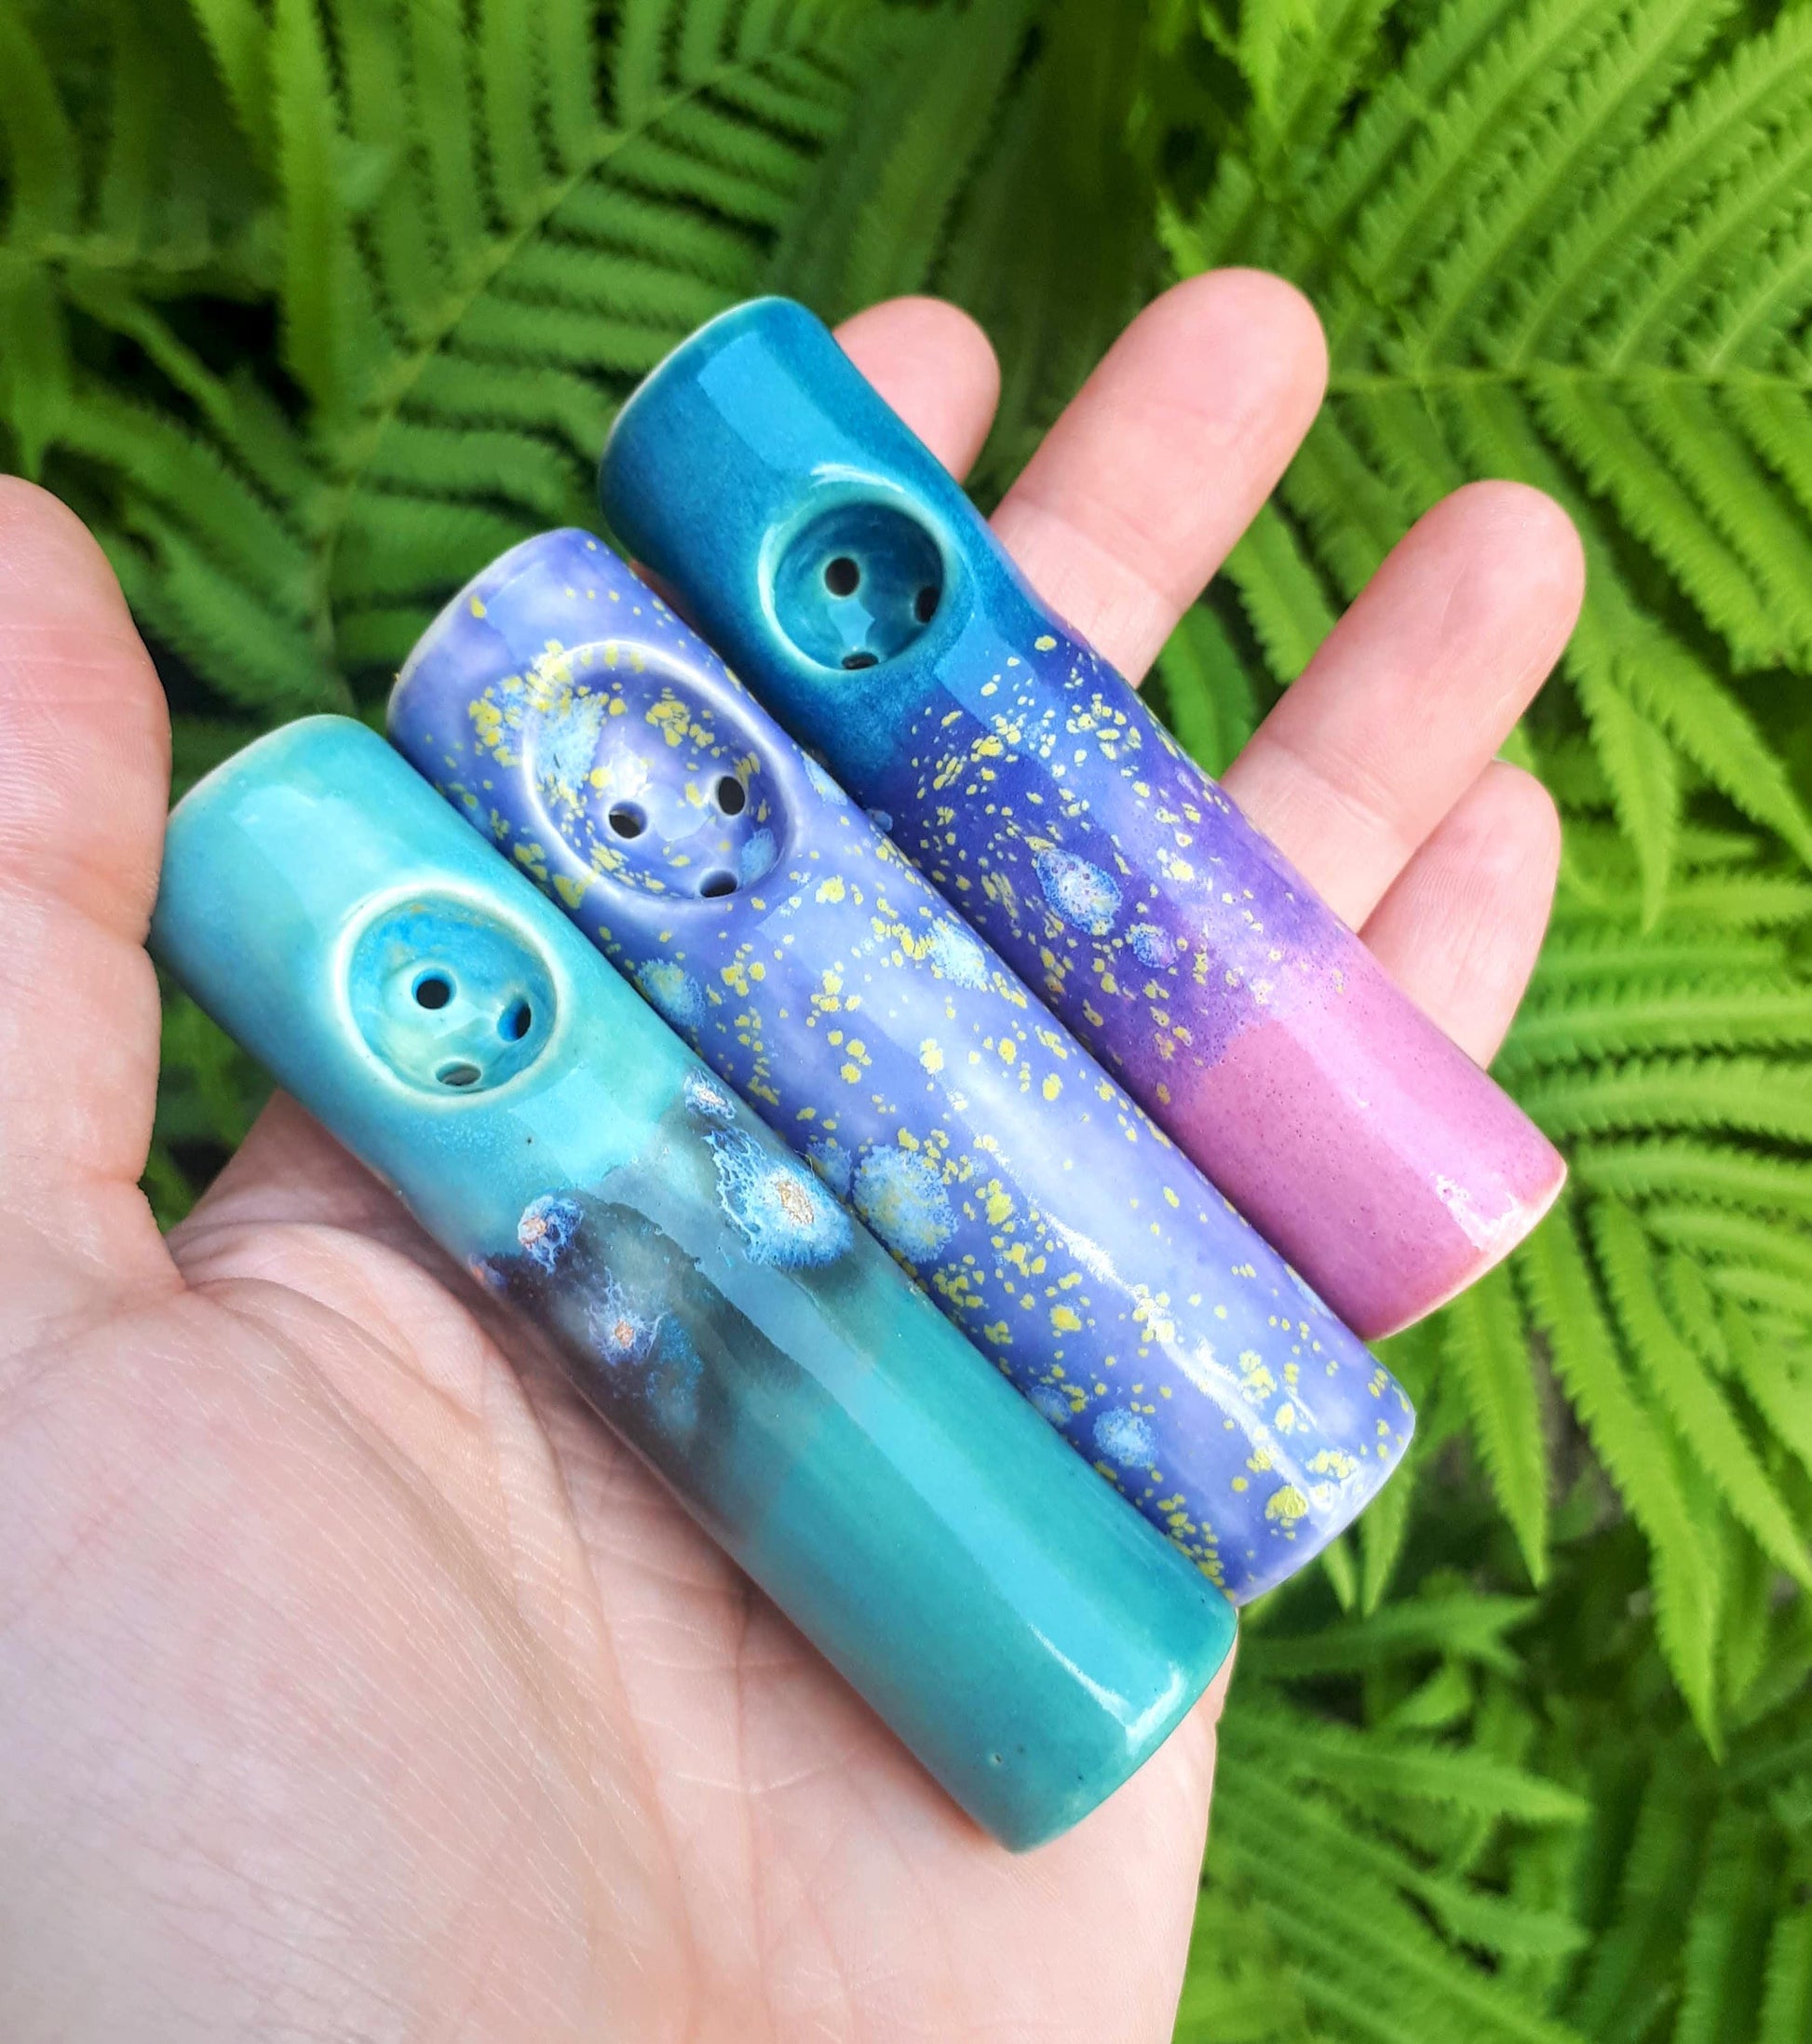 Dream collection mini purse cannabis pipes on hand in front of ferns